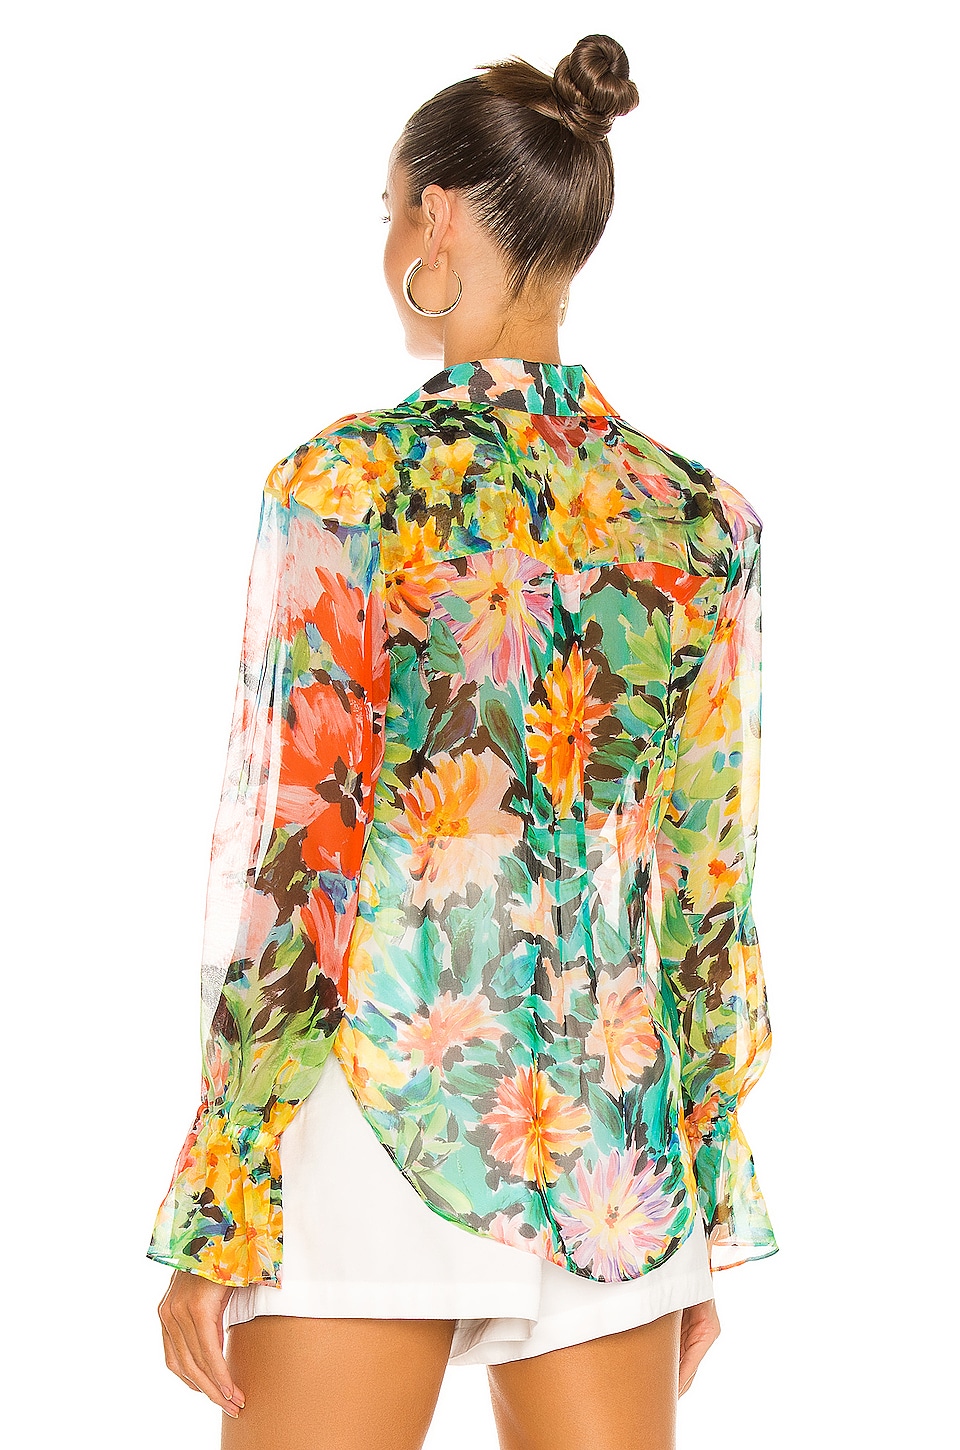 MILLY Lacey Garden Floral Blouse in Multi | REVOLVE